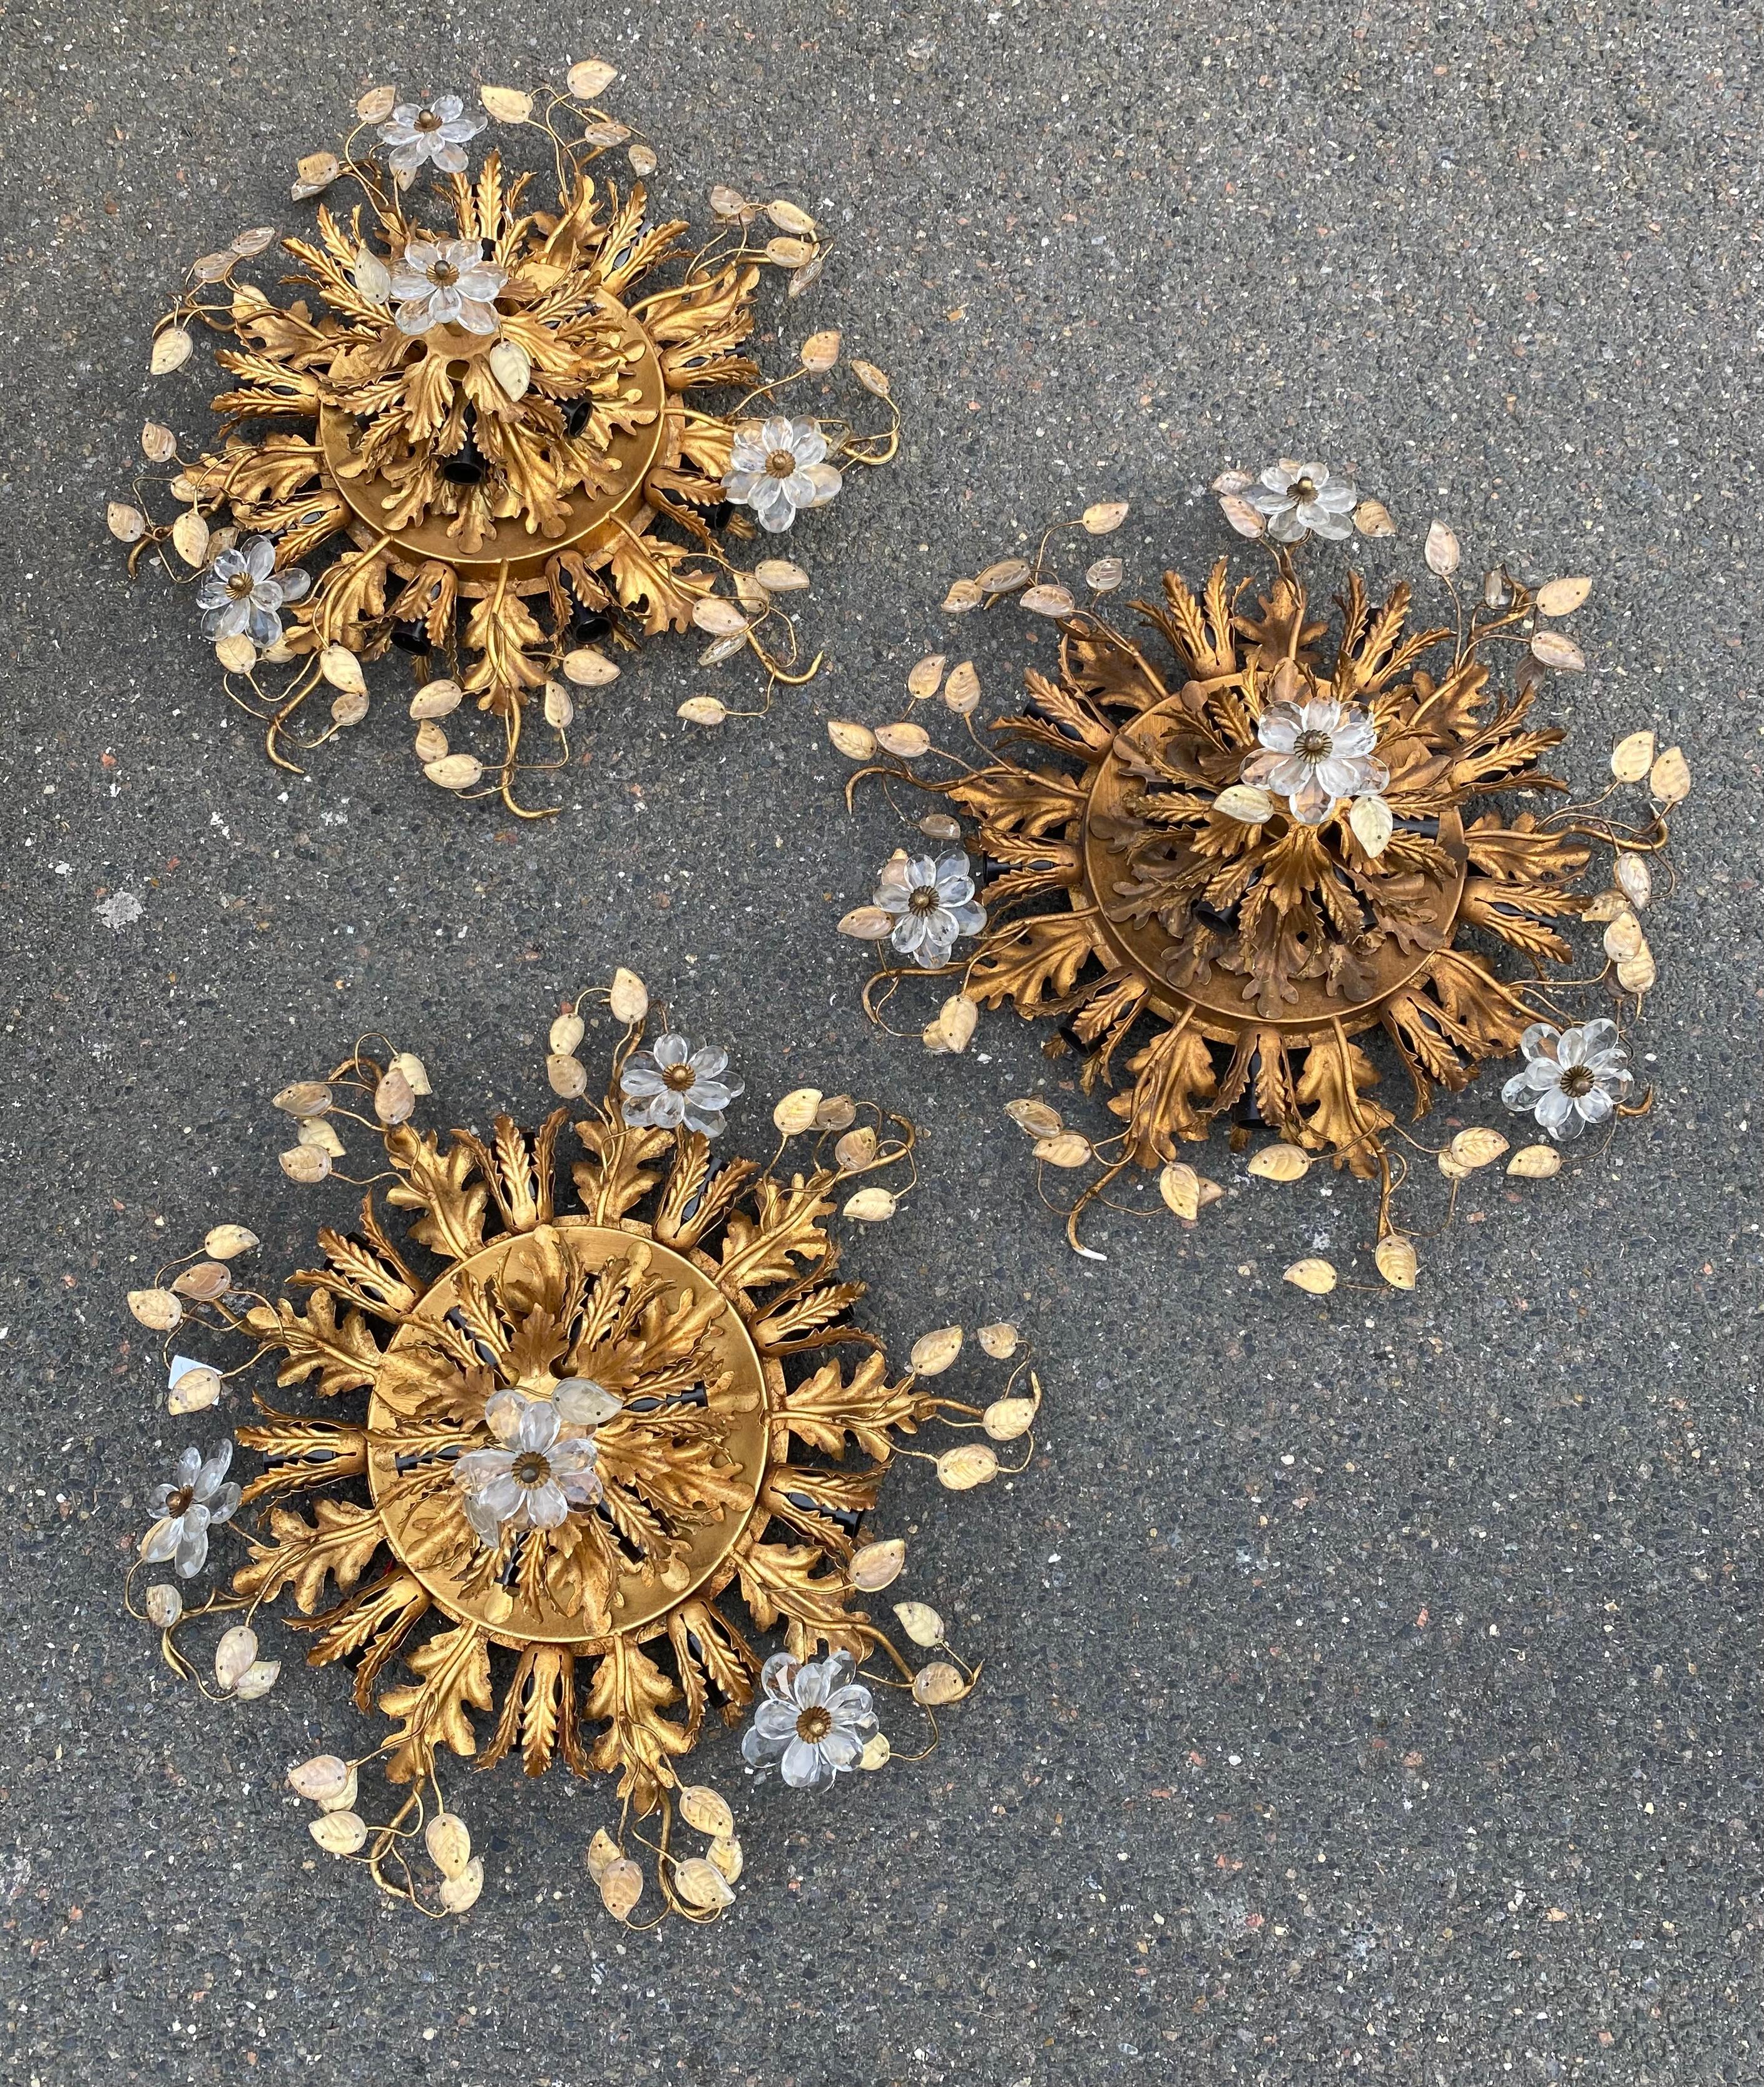 Suite of 3 ceiling lights or wall lights in gold metal, 15 bulbs in 2 rows Decorated with leaves and flowers in glass or crystal
Good condition,
Circa 1970
Height: 17 cm
Diameter: 60 cm